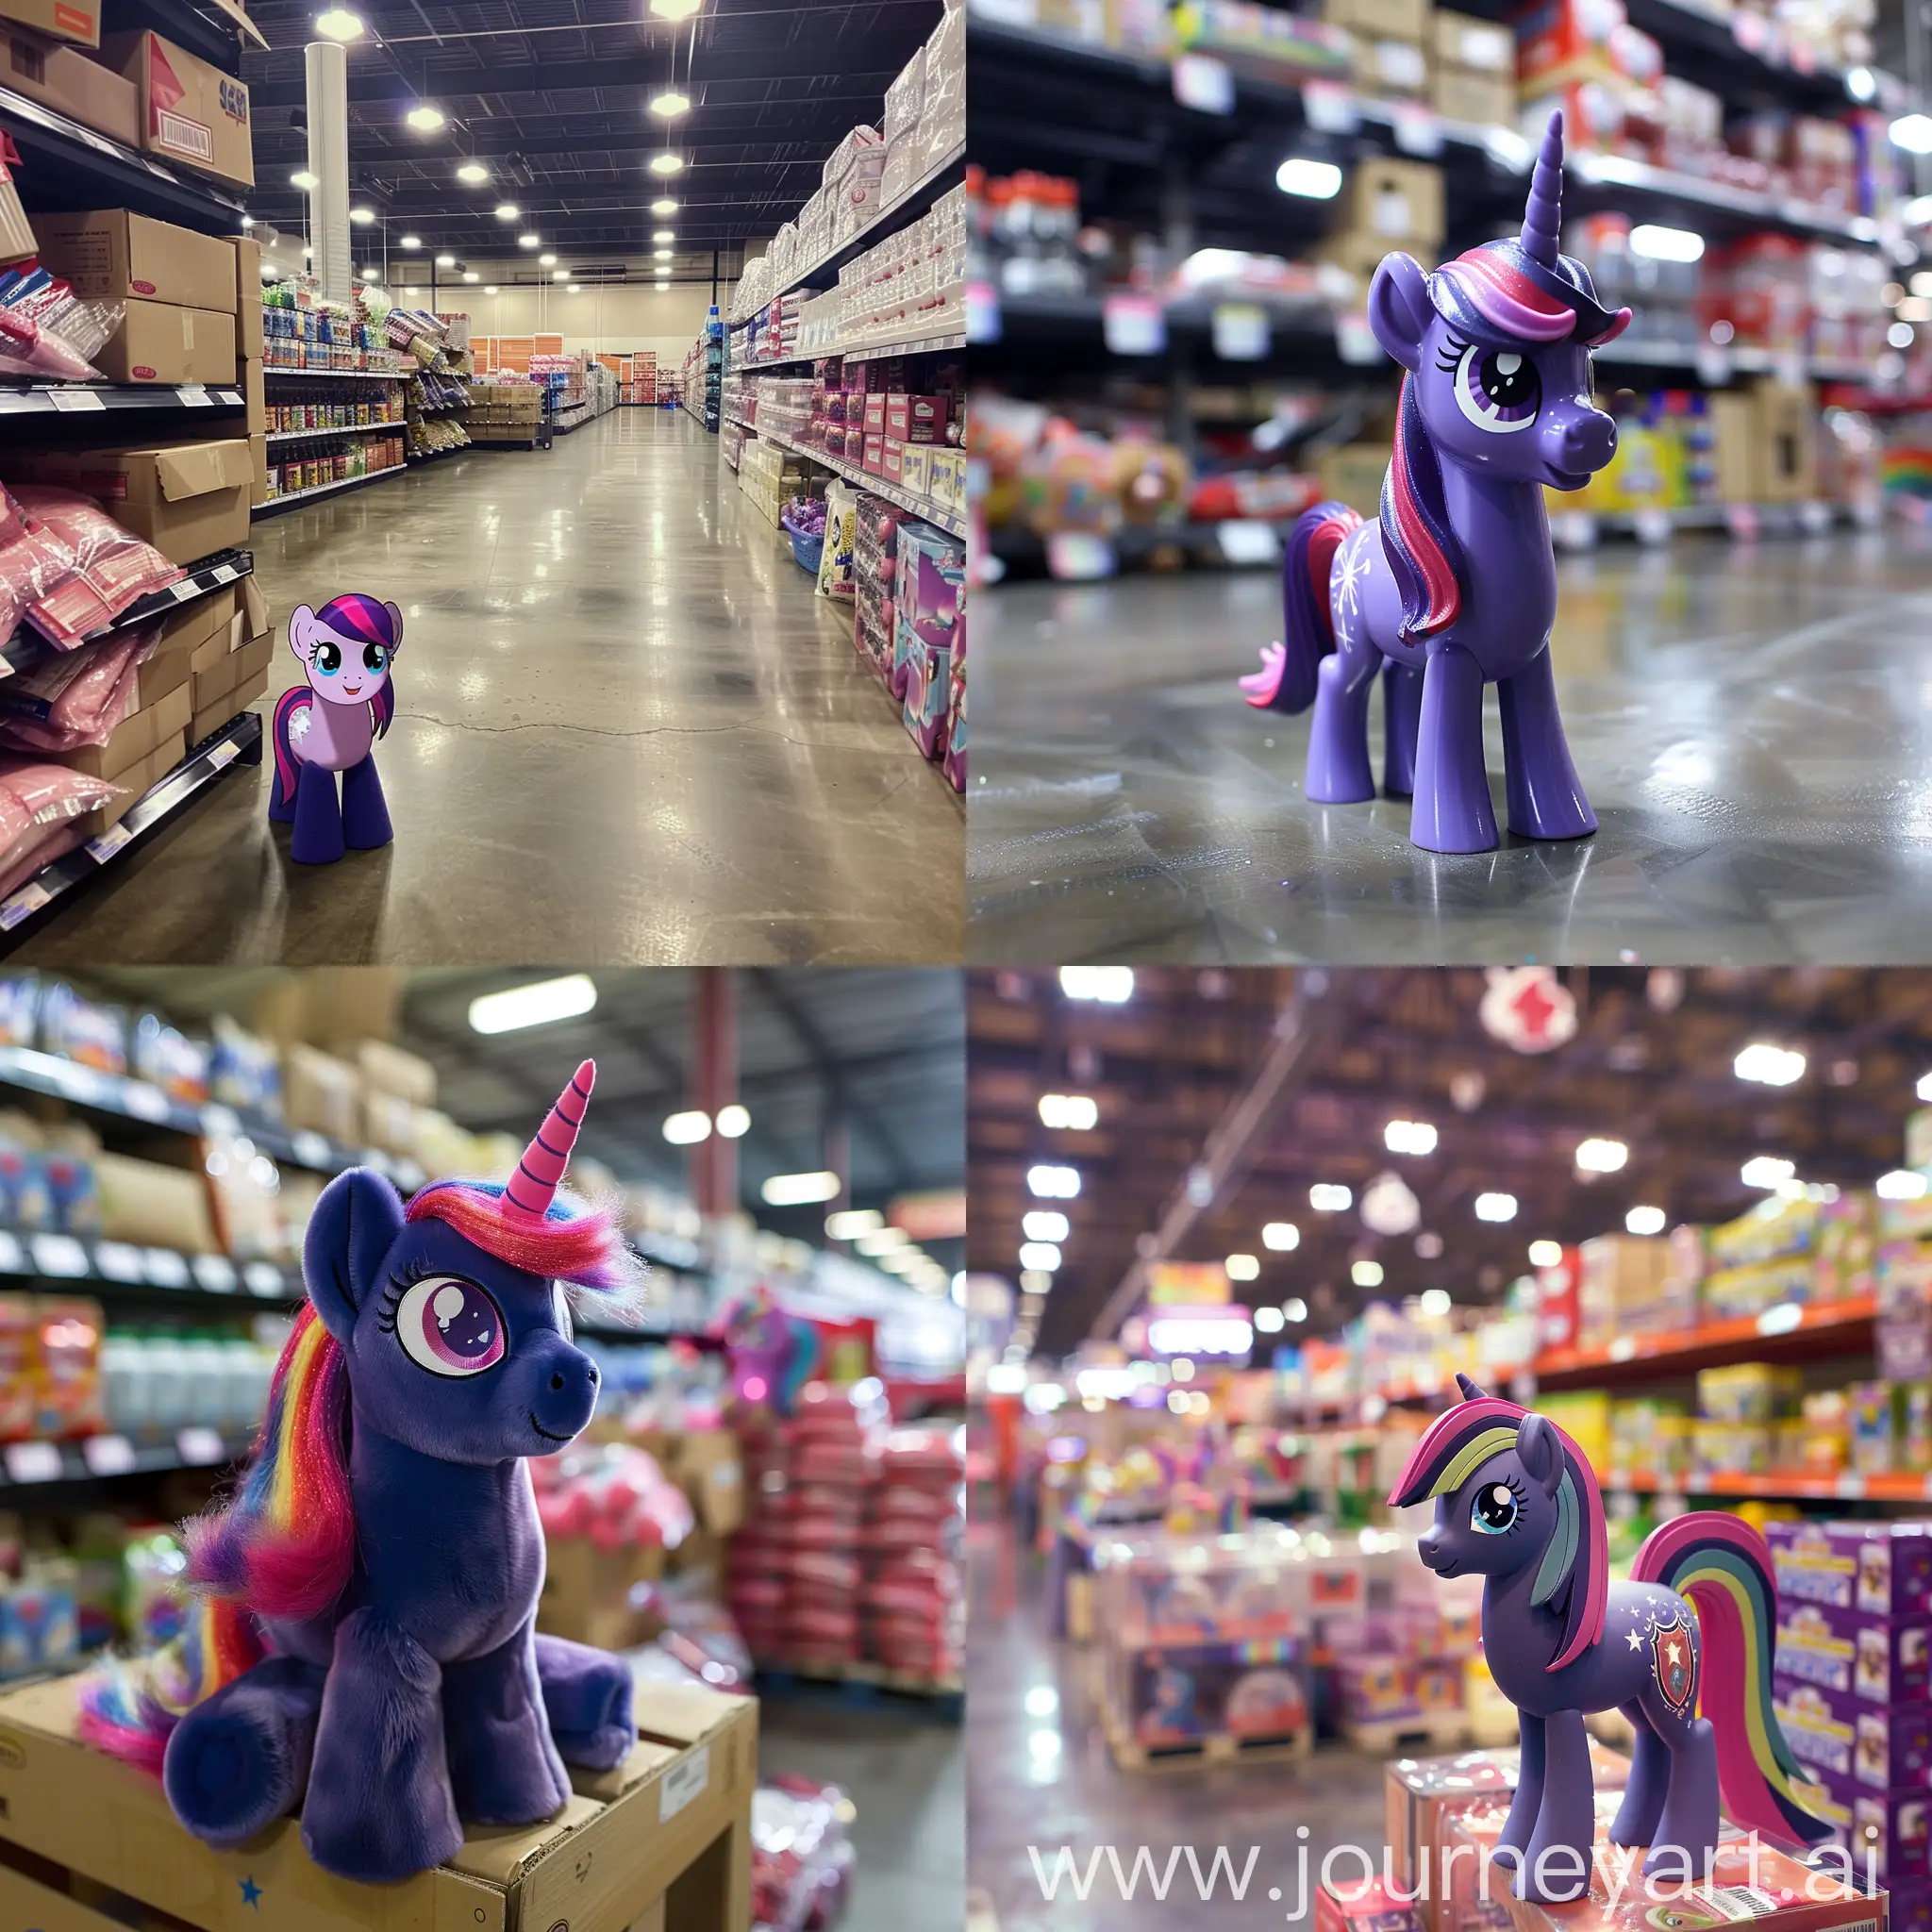 Twilight-Sparkle-Shopping-at-Costco-with-My-Little-Pony